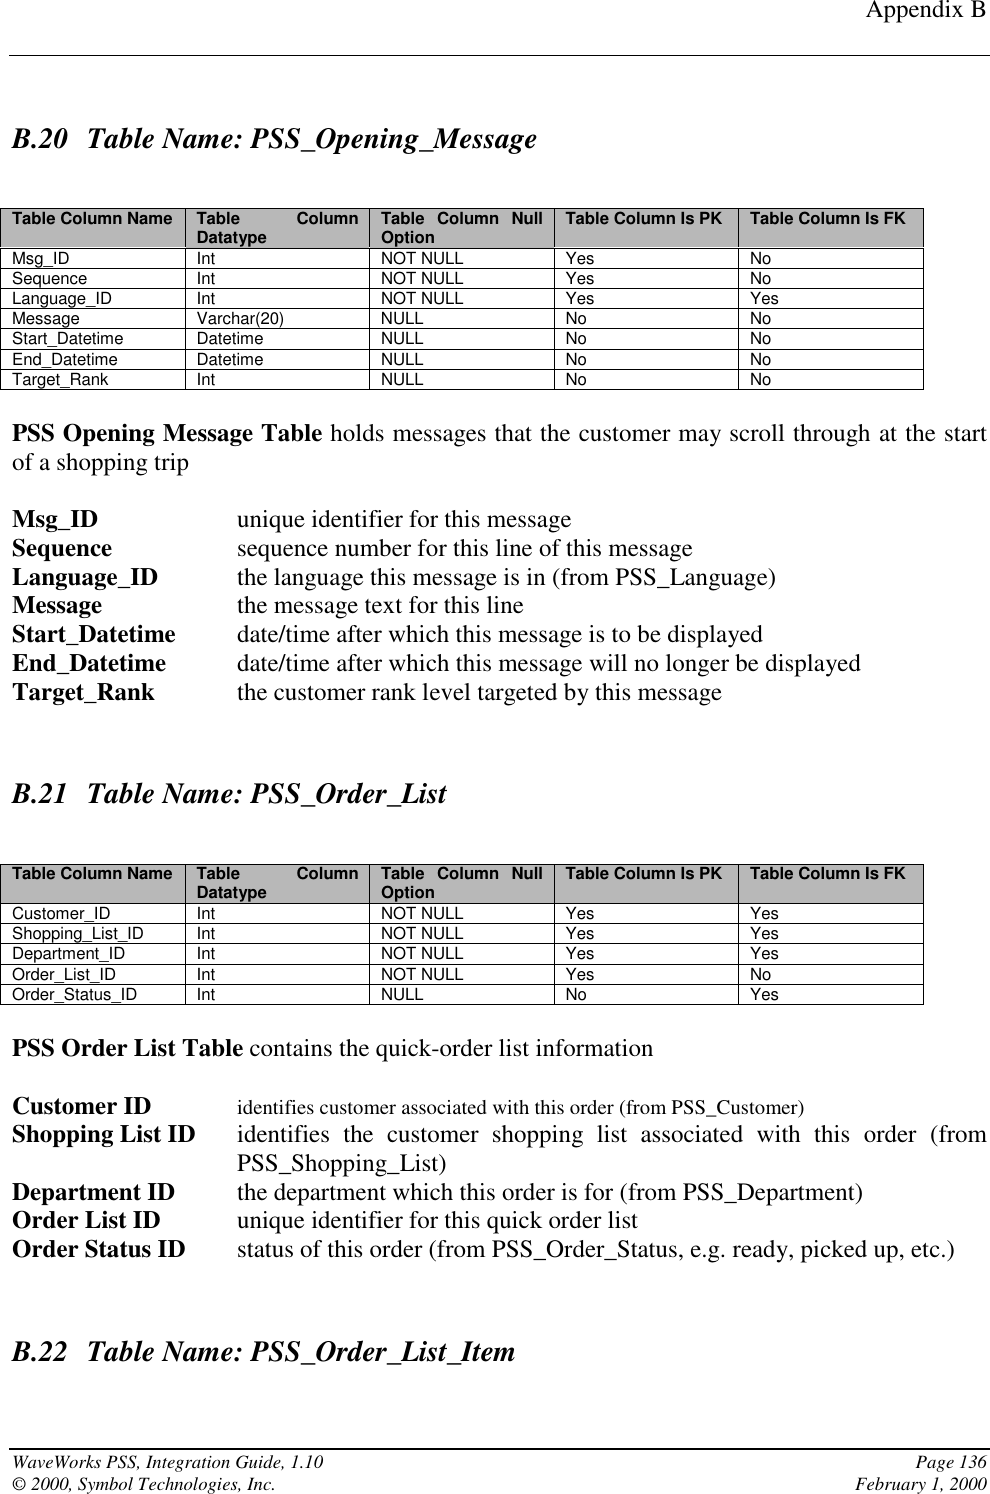 Appendix BWaveWorks PSS, Integration Guide, 1.10 Page 136© 2000, Symbol Technologies, Inc. February 1, 2000B.20 Table Name: PSS_Opening_MessageTable Column Name Table ColumnDatatype Table Column NullOption Table Column Is PK Table Column Is FKMsg_ID Int NOT NULL Yes NoSequence Int NOT NULL Yes NoLanguage_ID Int NOT NULL Yes YesMessage Varchar(20) NULL No NoStart_Datetime Datetime NULL No NoEnd_Datetime Datetime NULL No NoTarget_Rank Int NULL No NoPSS Opening Message Table holds messages that the customer may scroll through at the startof a shopping tripMsg_ID unique identifier for this messageSequence sequence number for this line of this messageLanguage_ID the language this message is in (from PSS_Language)Message the message text for this lineStart_Datetime date/time after which this message is to be displayedEnd_Datetime date/time after which this message will no longer be displayedTarget_Rank the customer rank level targeted by this messageB.21 Table Name: PSS_Order_ListTable Column Name Table ColumnDatatype Table Column NullOption Table Column Is PK Table Column Is FKCustomer_ID Int NOT NULL Yes YesShopping_List_ID Int NOT NULL Yes YesDepartment_ID Int NOT NULL Yes YesOrder_List_ID Int NOT NULL Yes NoOrder_Status_ID Int NULL No YesPSS Order List Table contains the quick-order list informationCustomer ID identifies customer associated with this order (from PSS_Customer)Shopping List ID identifies the customer shopping list associated with this order (fromPSS_Shopping_List)Department ID the department which this order is for (from PSS_Department)Order List ID unique identifier for this quick order listOrder Status ID status of this order (from PSS_Order_Status, e.g. ready, picked up, etc.)B.22 Table Name: PSS_Order_List_Item